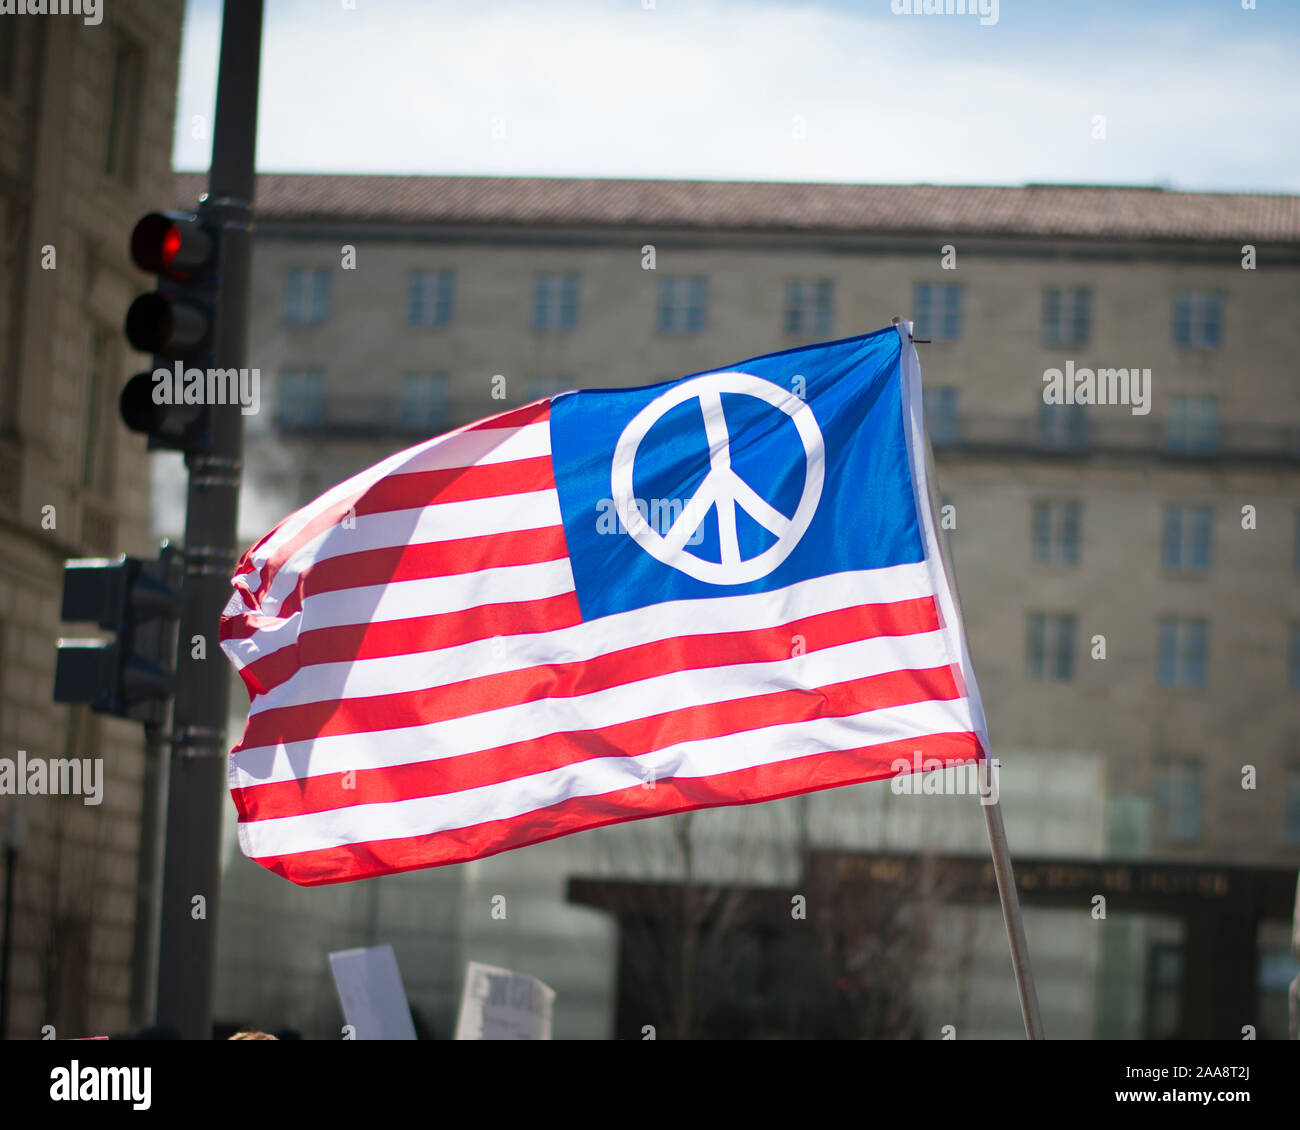 American flag with peace symbol instead of stars Stock Photo